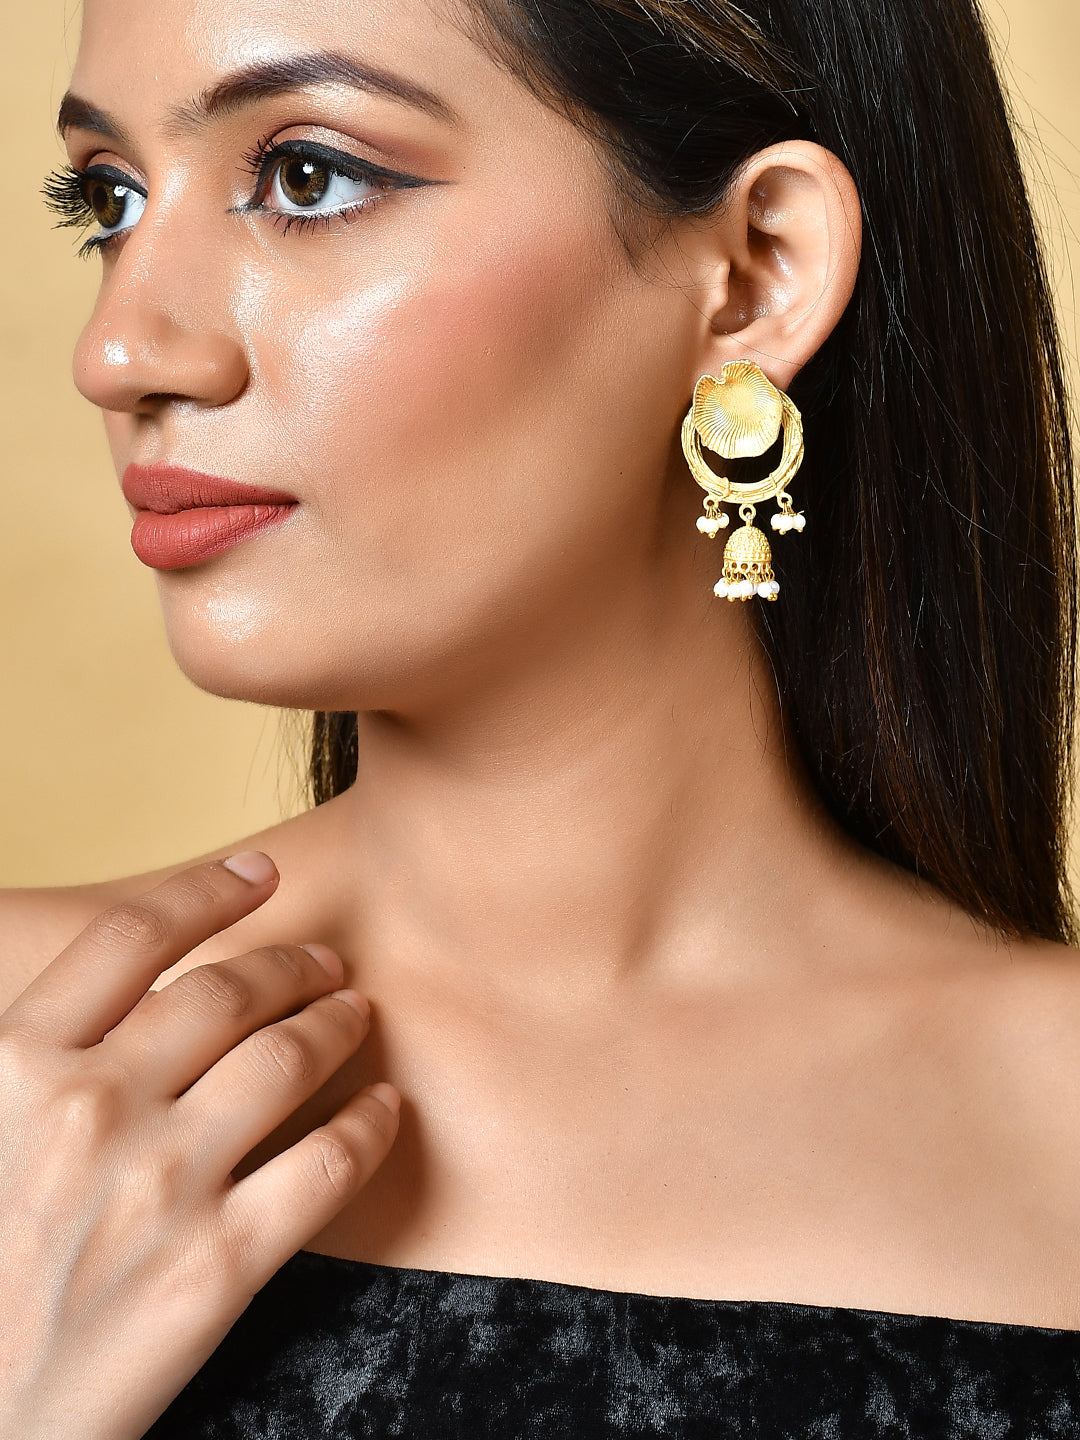 Gold Plated Handcrafted Jhumka Earrings